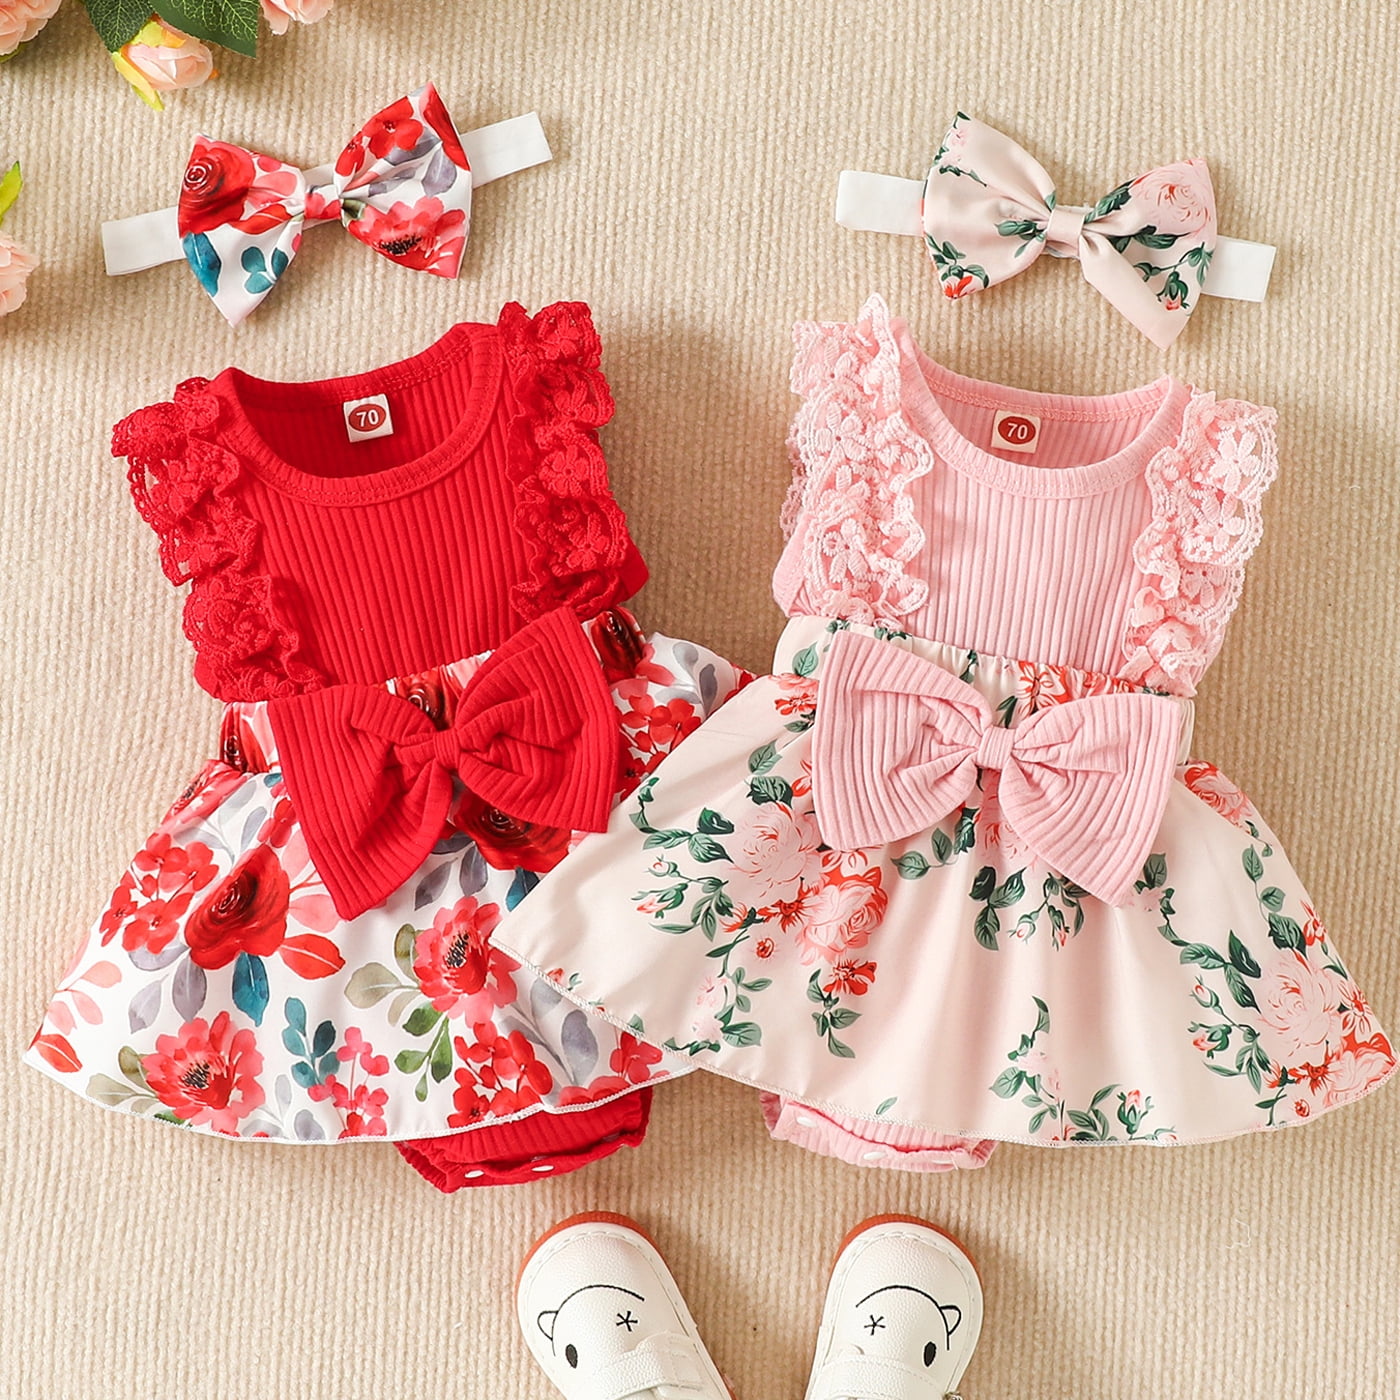 Zukuco Newborn Baby Girl Romper Outfits Cute Ruffle One Piece Floral  Jumpsuit Dresses and Headband Summer Baby Clothes